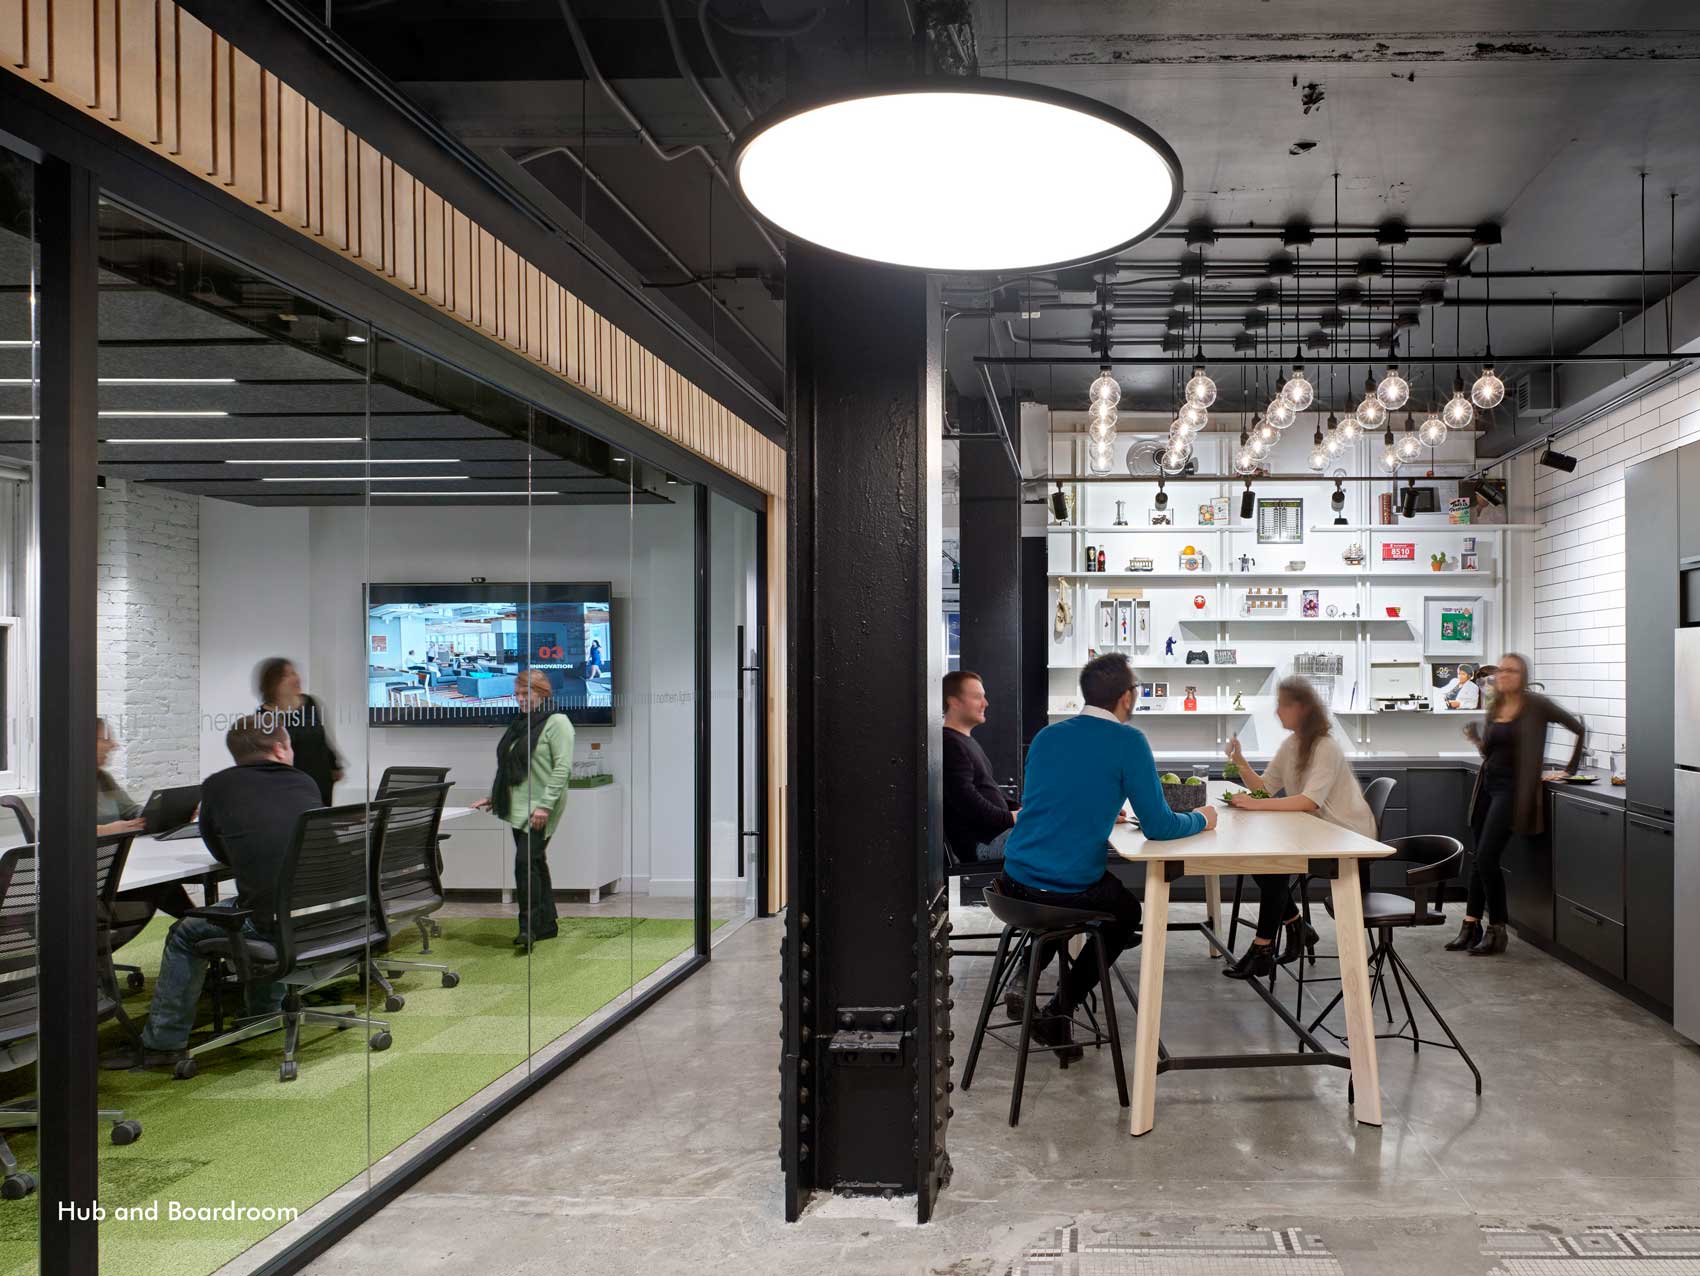 Global thinking was central to this architectural design firm’s new Toronto office